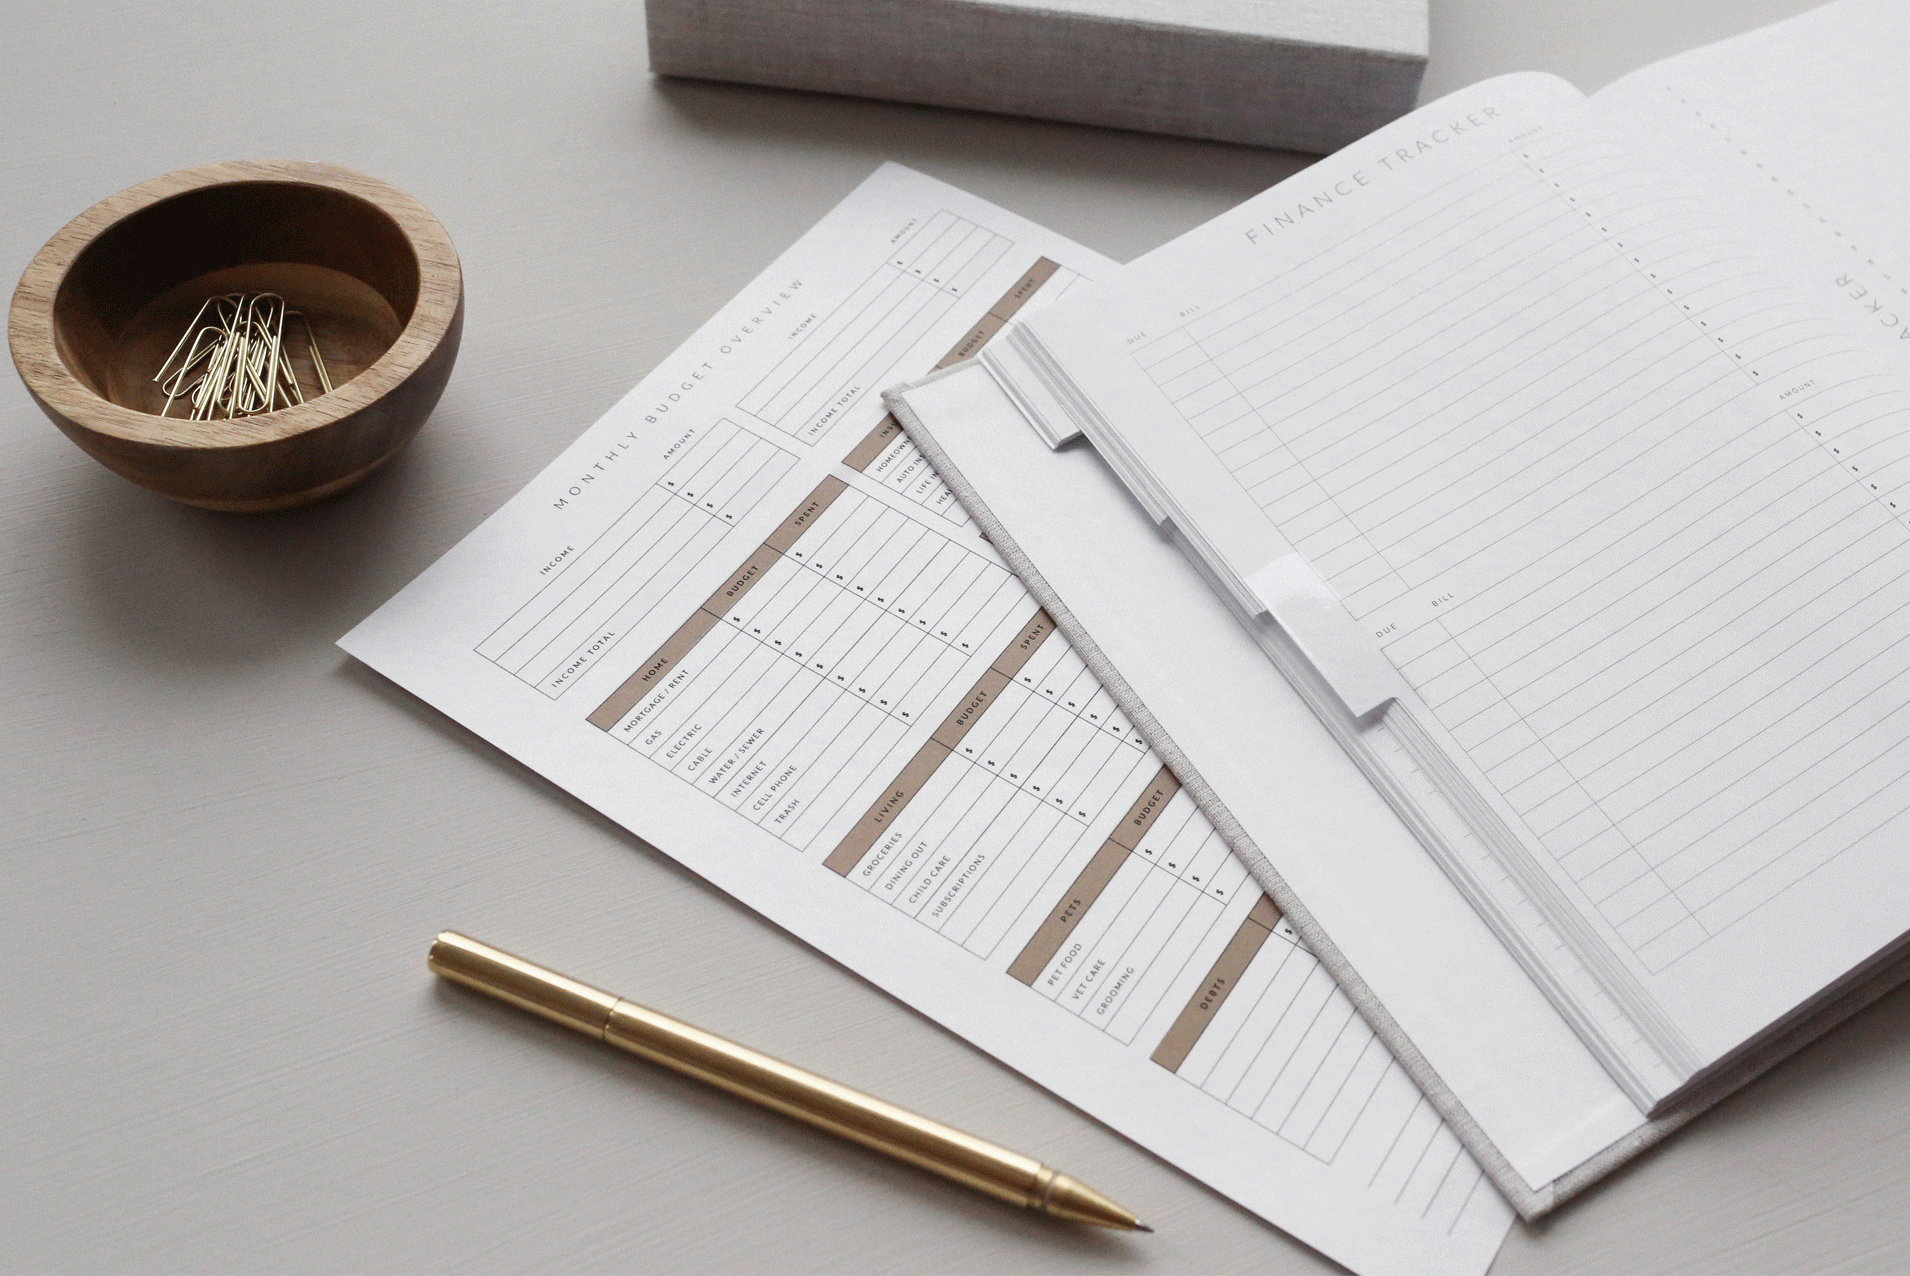 Application Form with a pen